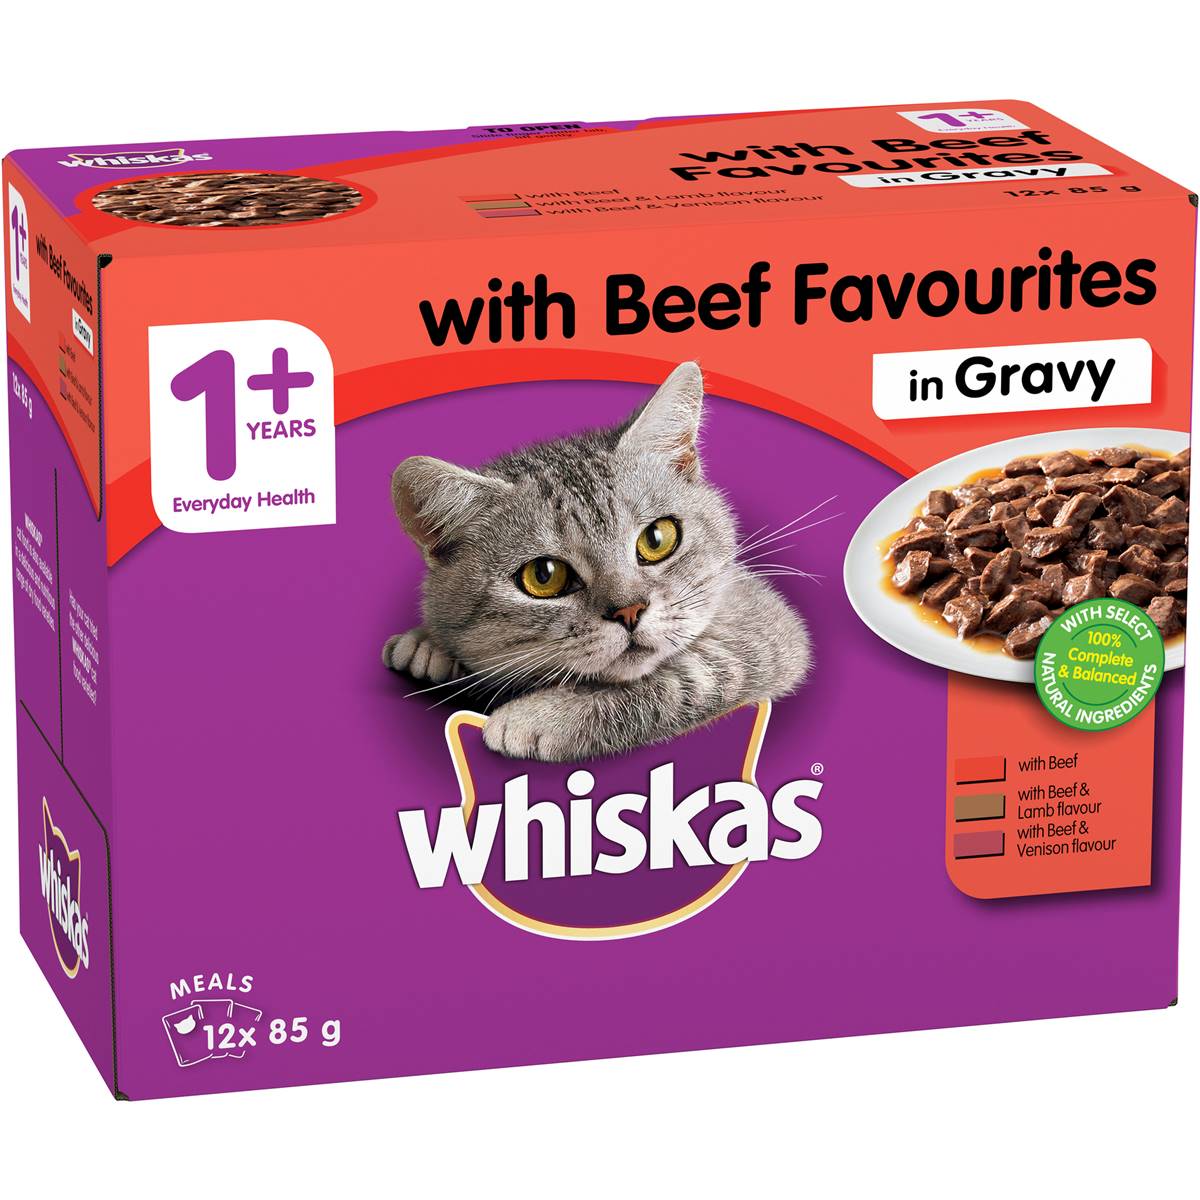 Whiskas 1+ Years Wet Cat Food Favourites Beef In Gravy Pouch 12x85g